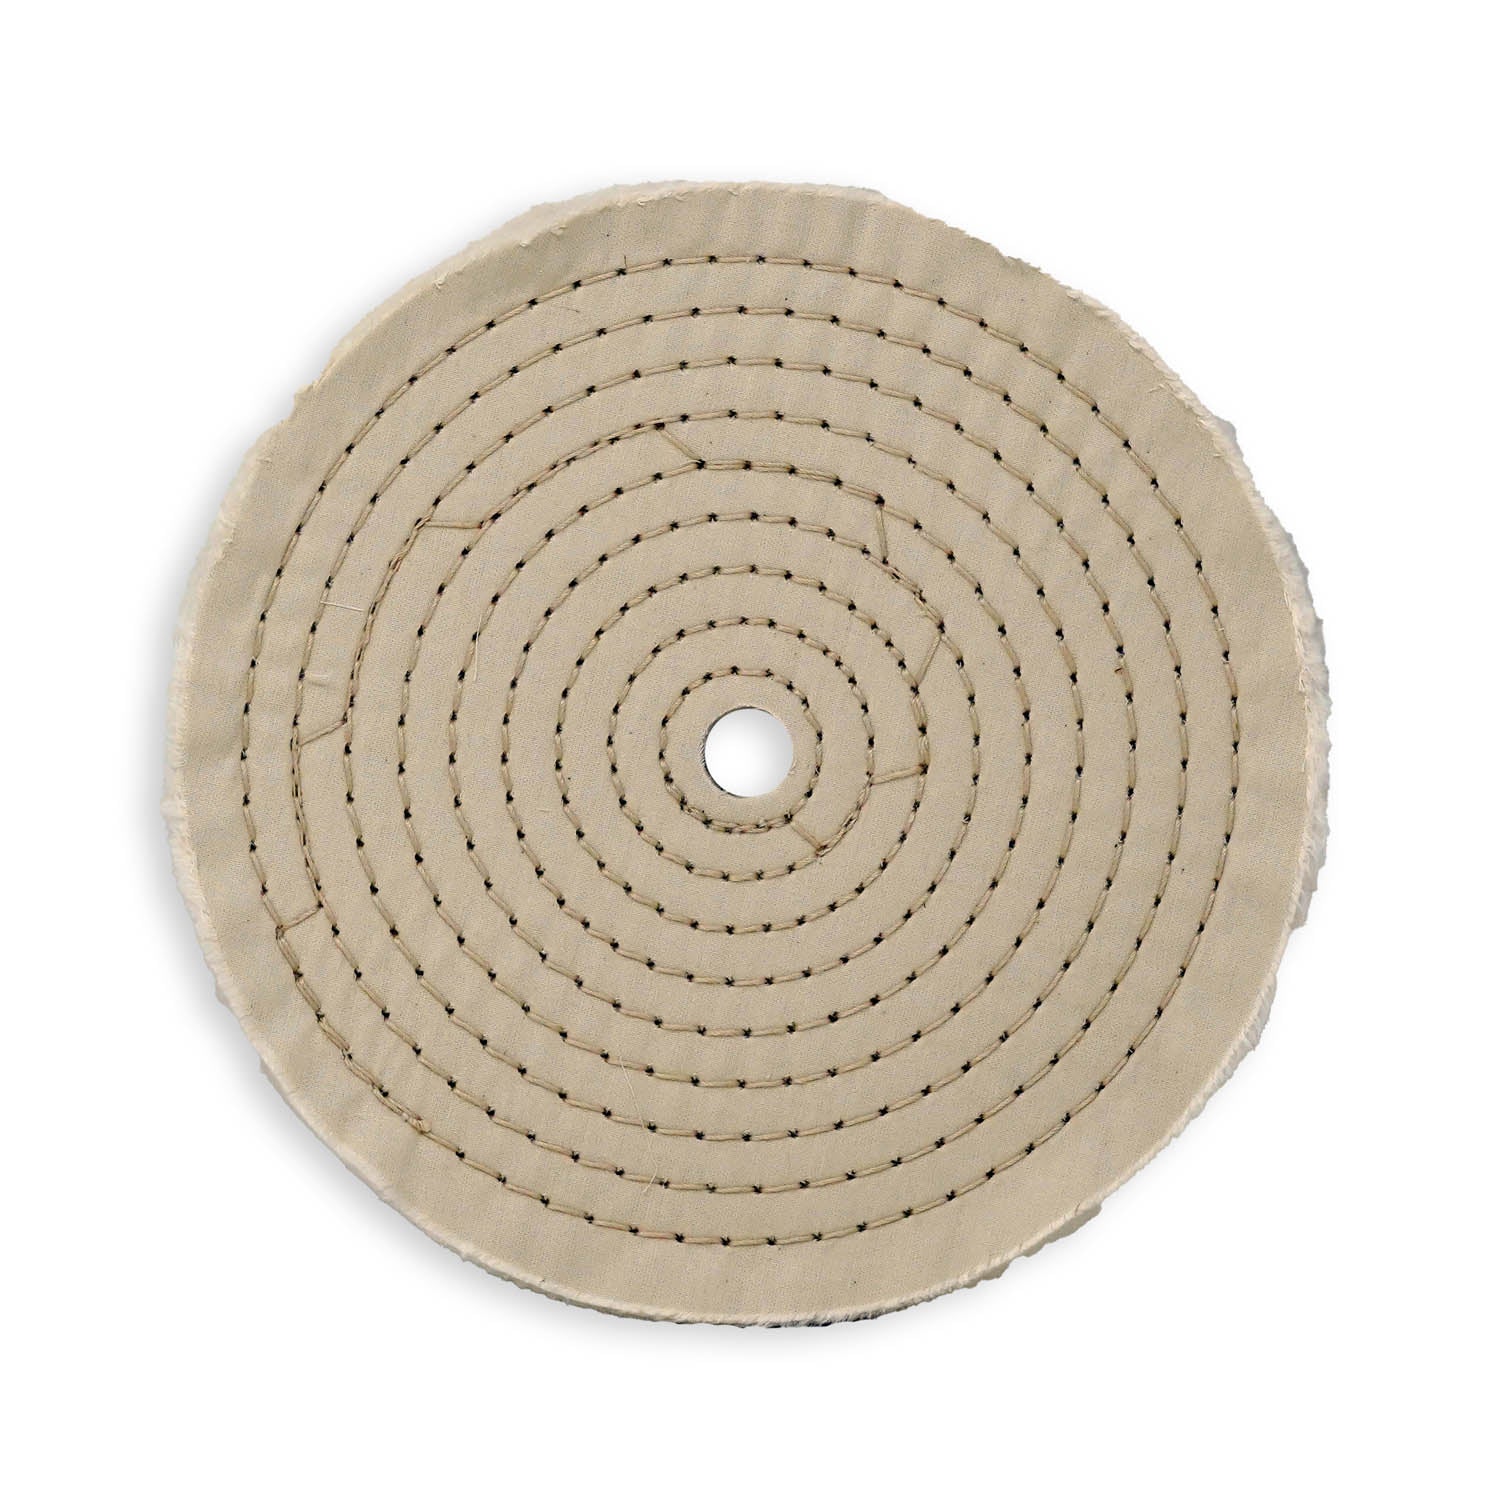 Zephyr 3 White Cotton Muslin 40-Ply Buffing Wheel